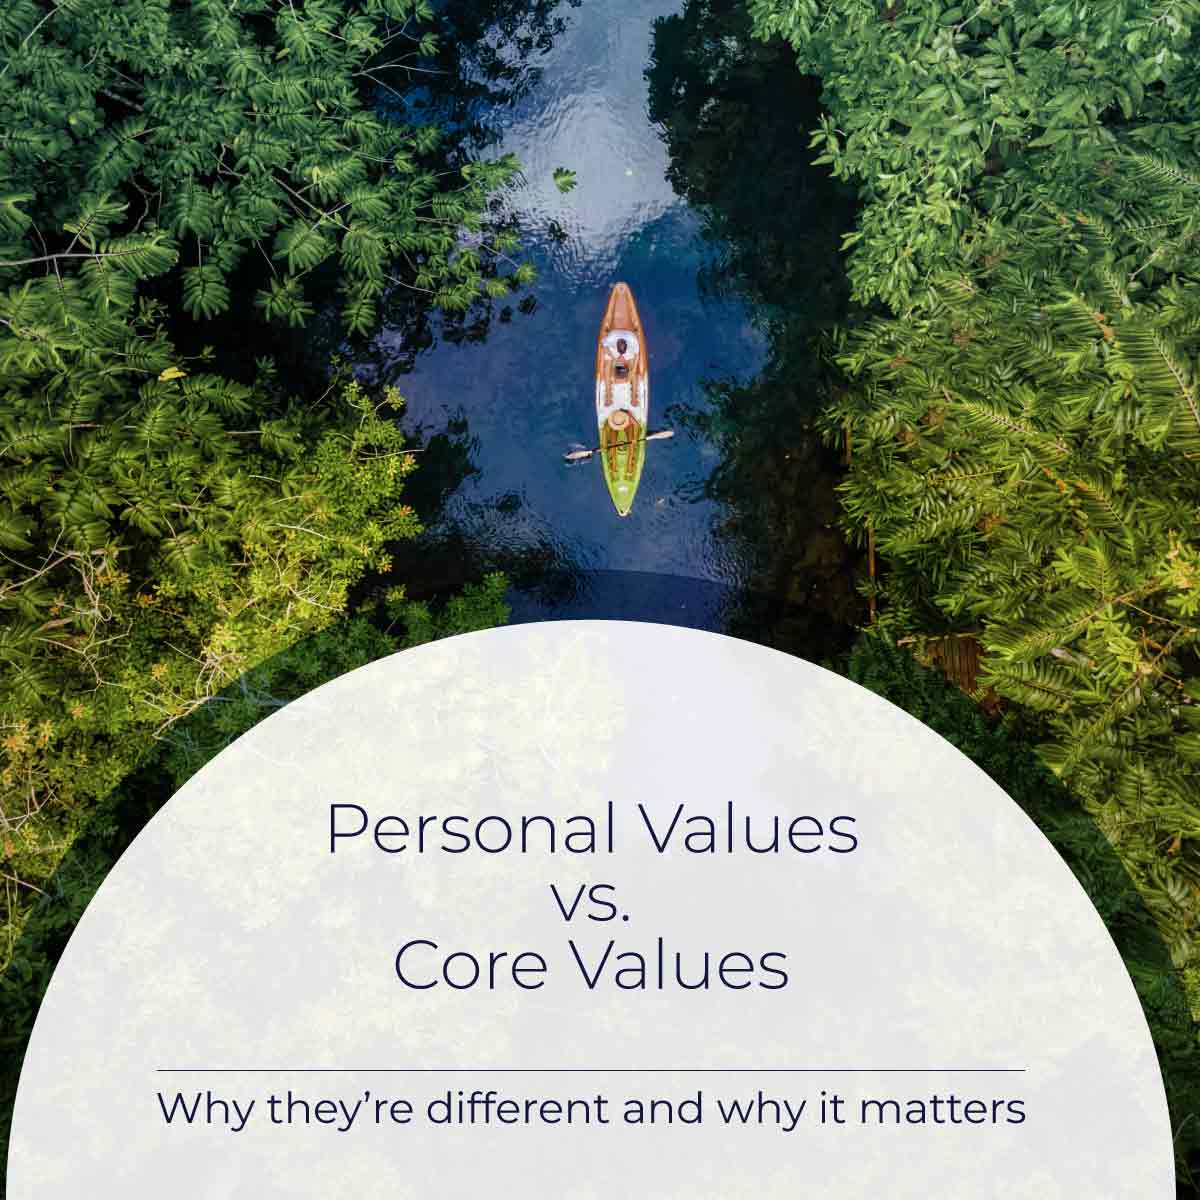 Personal Values Tests - Beware of misleading advice about core values